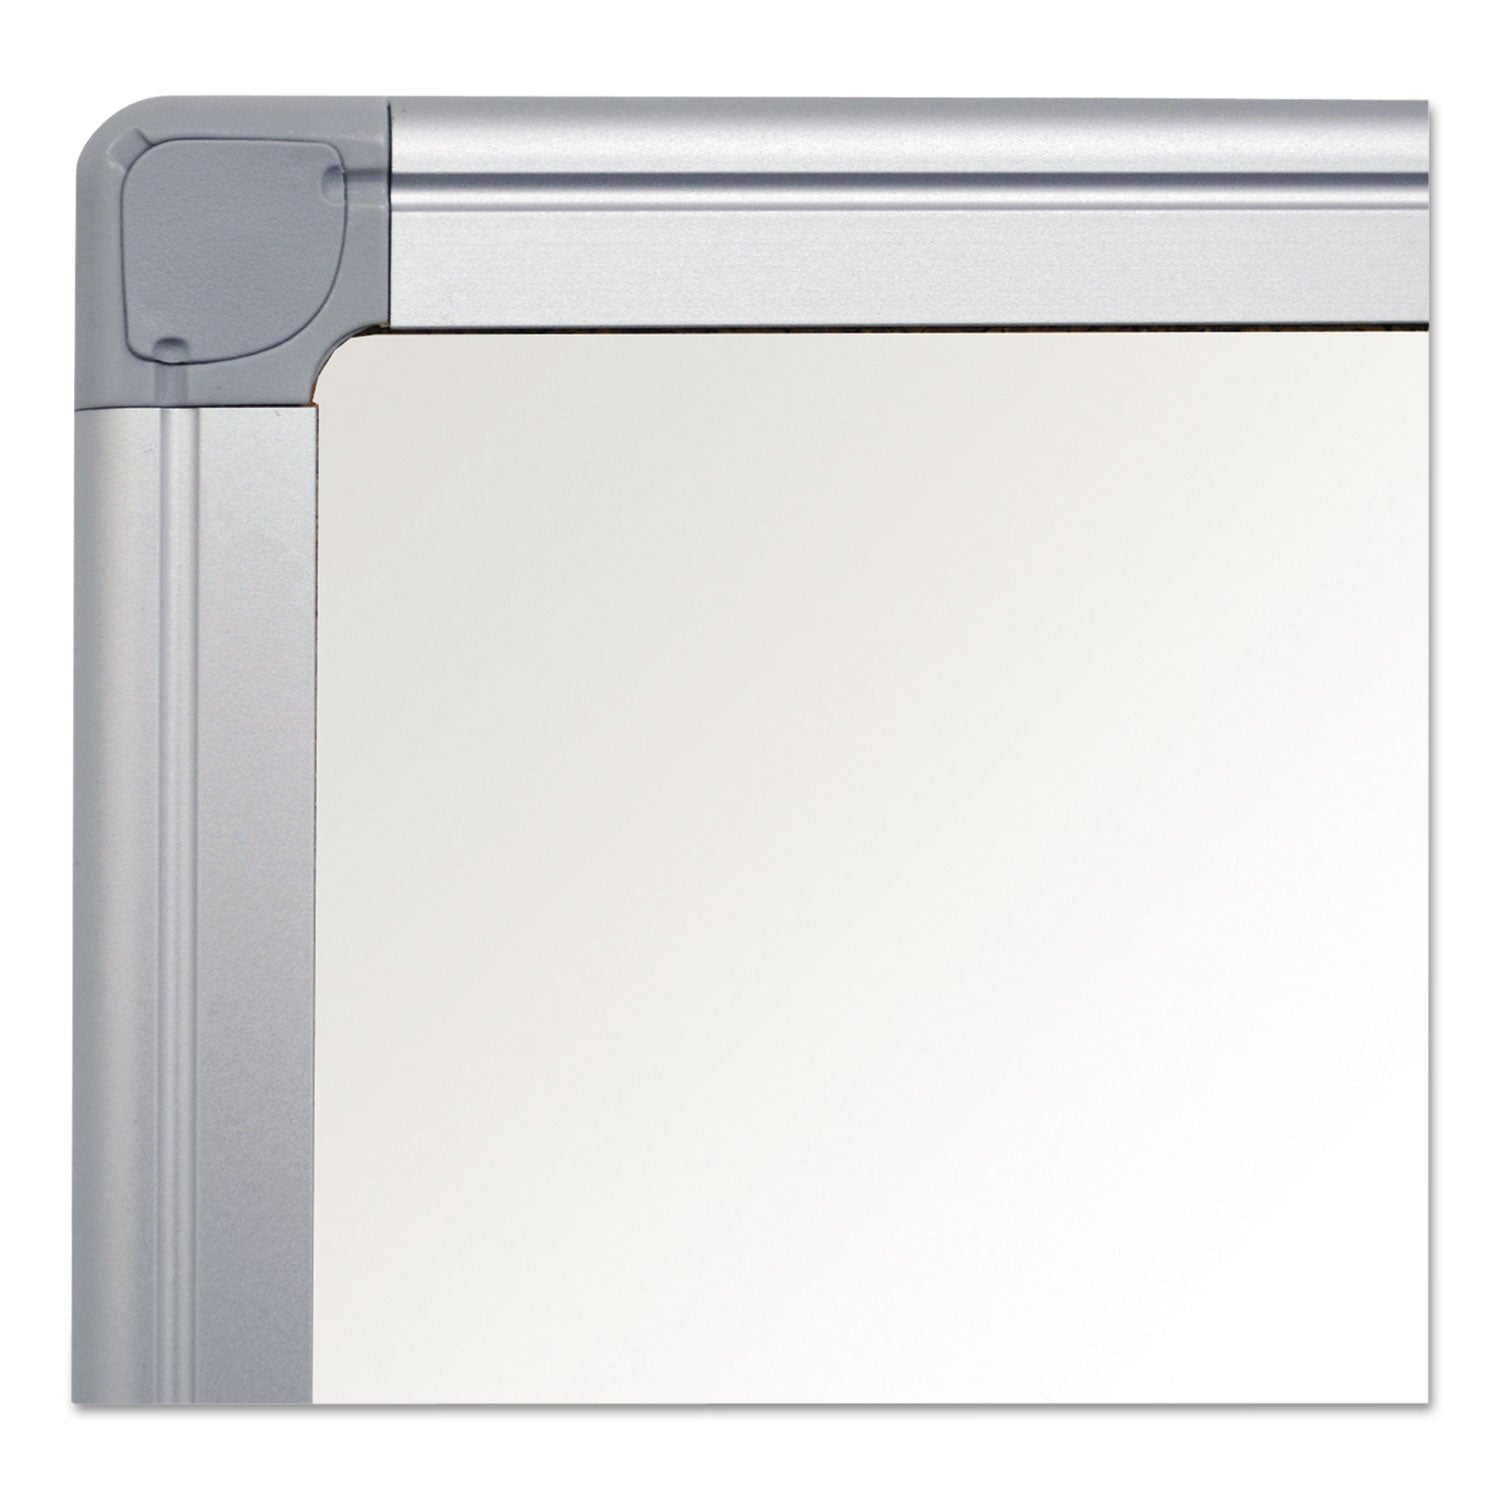 earth-silver-easy-clean-dry-erase-board-96-x-48-white-surface-silver-aluminum-frame_bvccr1520790 - 3